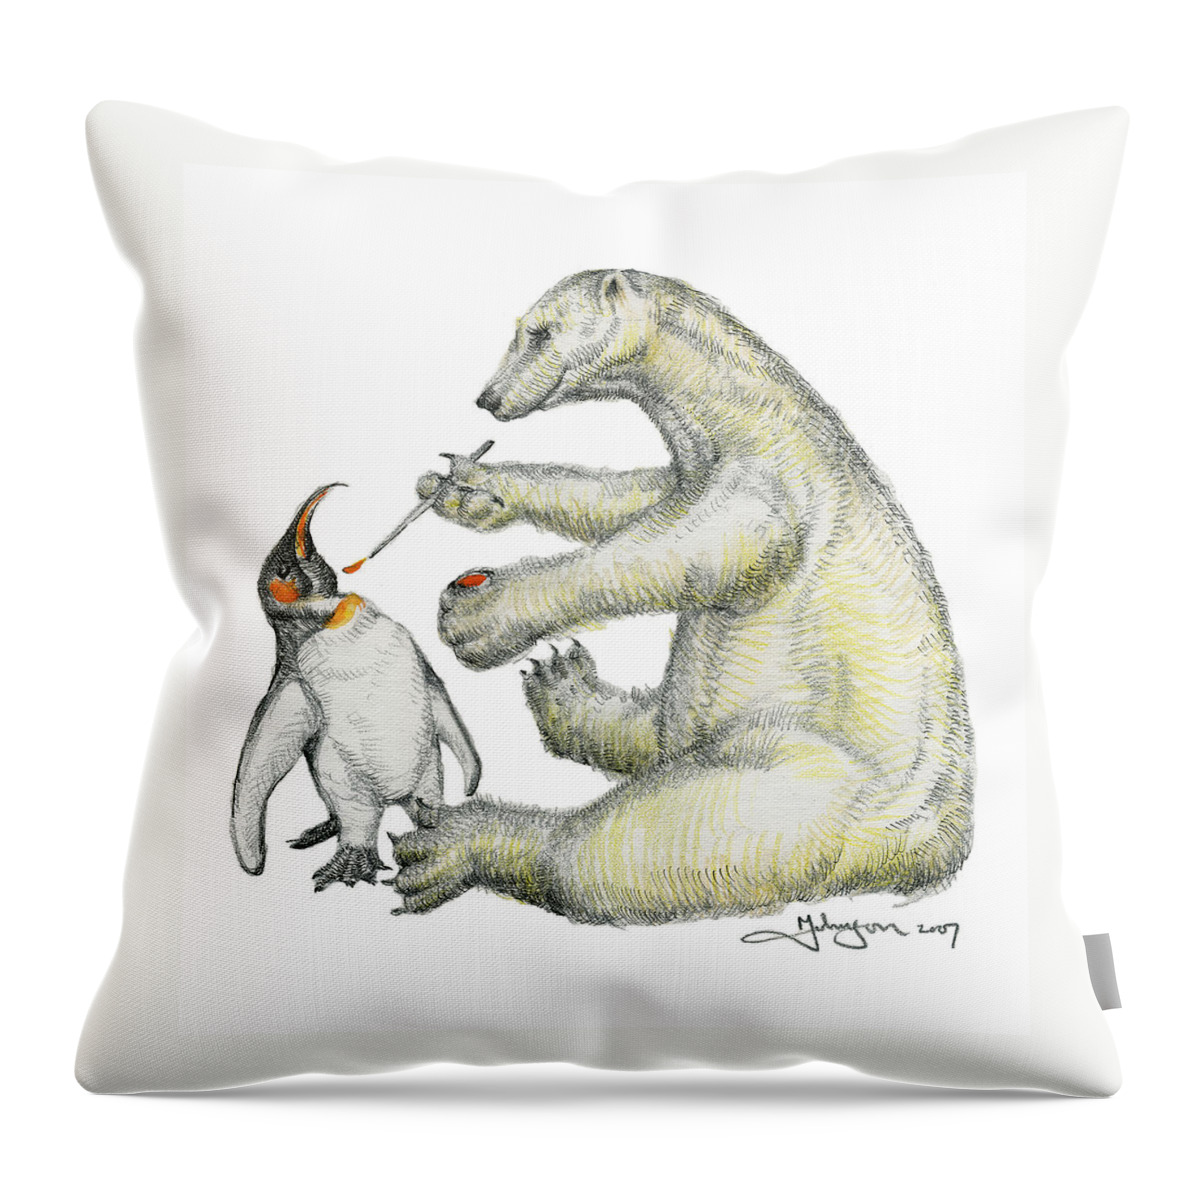 Whimsies Throw Pillow featuring the drawing Colour Bear by Mark Johnson